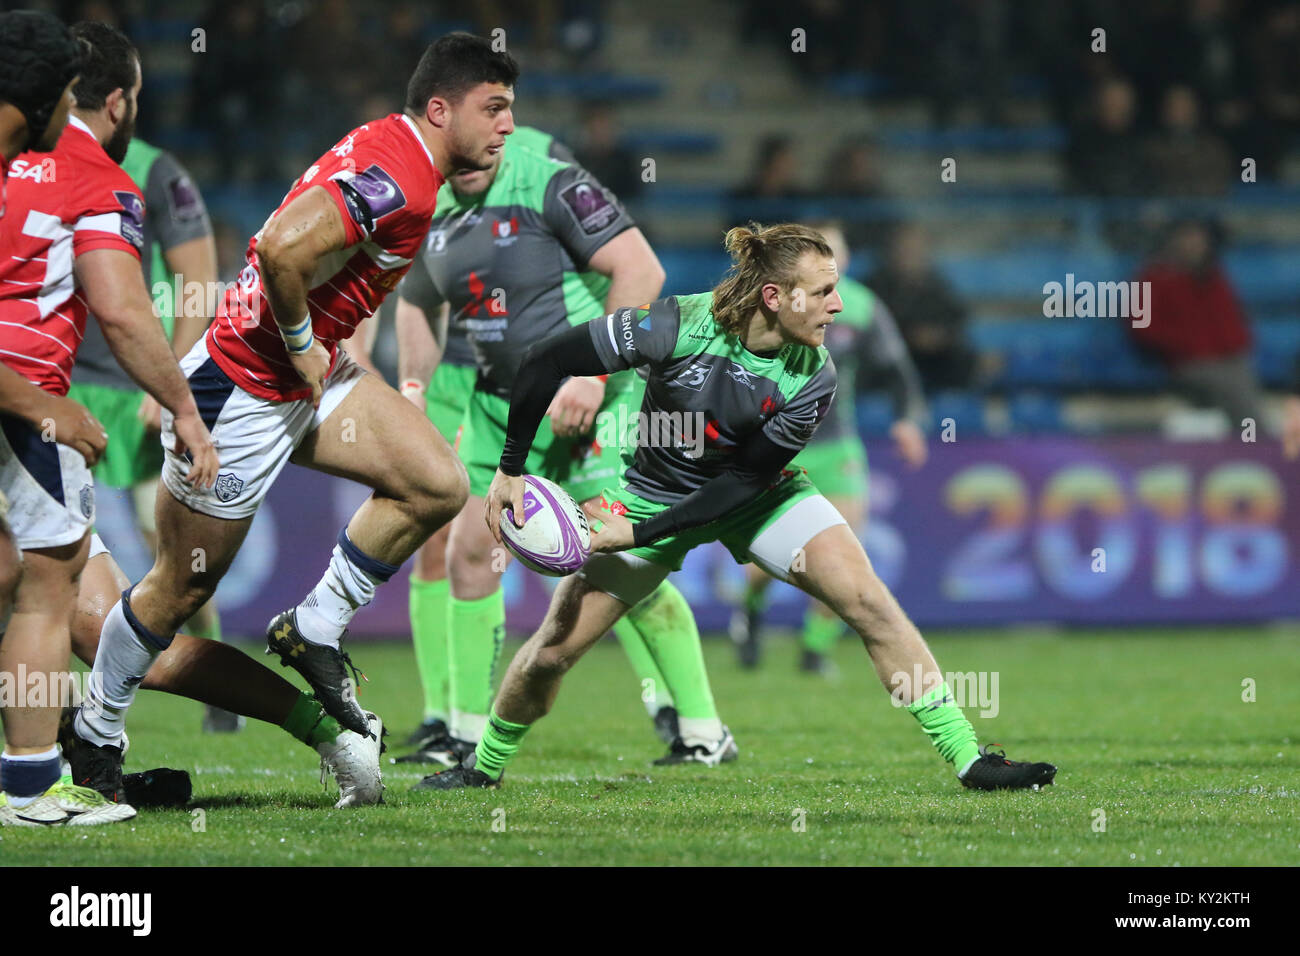 Agen, France. 12th Jan, 2018. Gloucester's Callum Braley during the match opposing Agen vs Gloucester in EPCR Challenge Cup 2017/2018. Credit: Sebastien Lapeyrere/Alamy Live News. Stock Photo